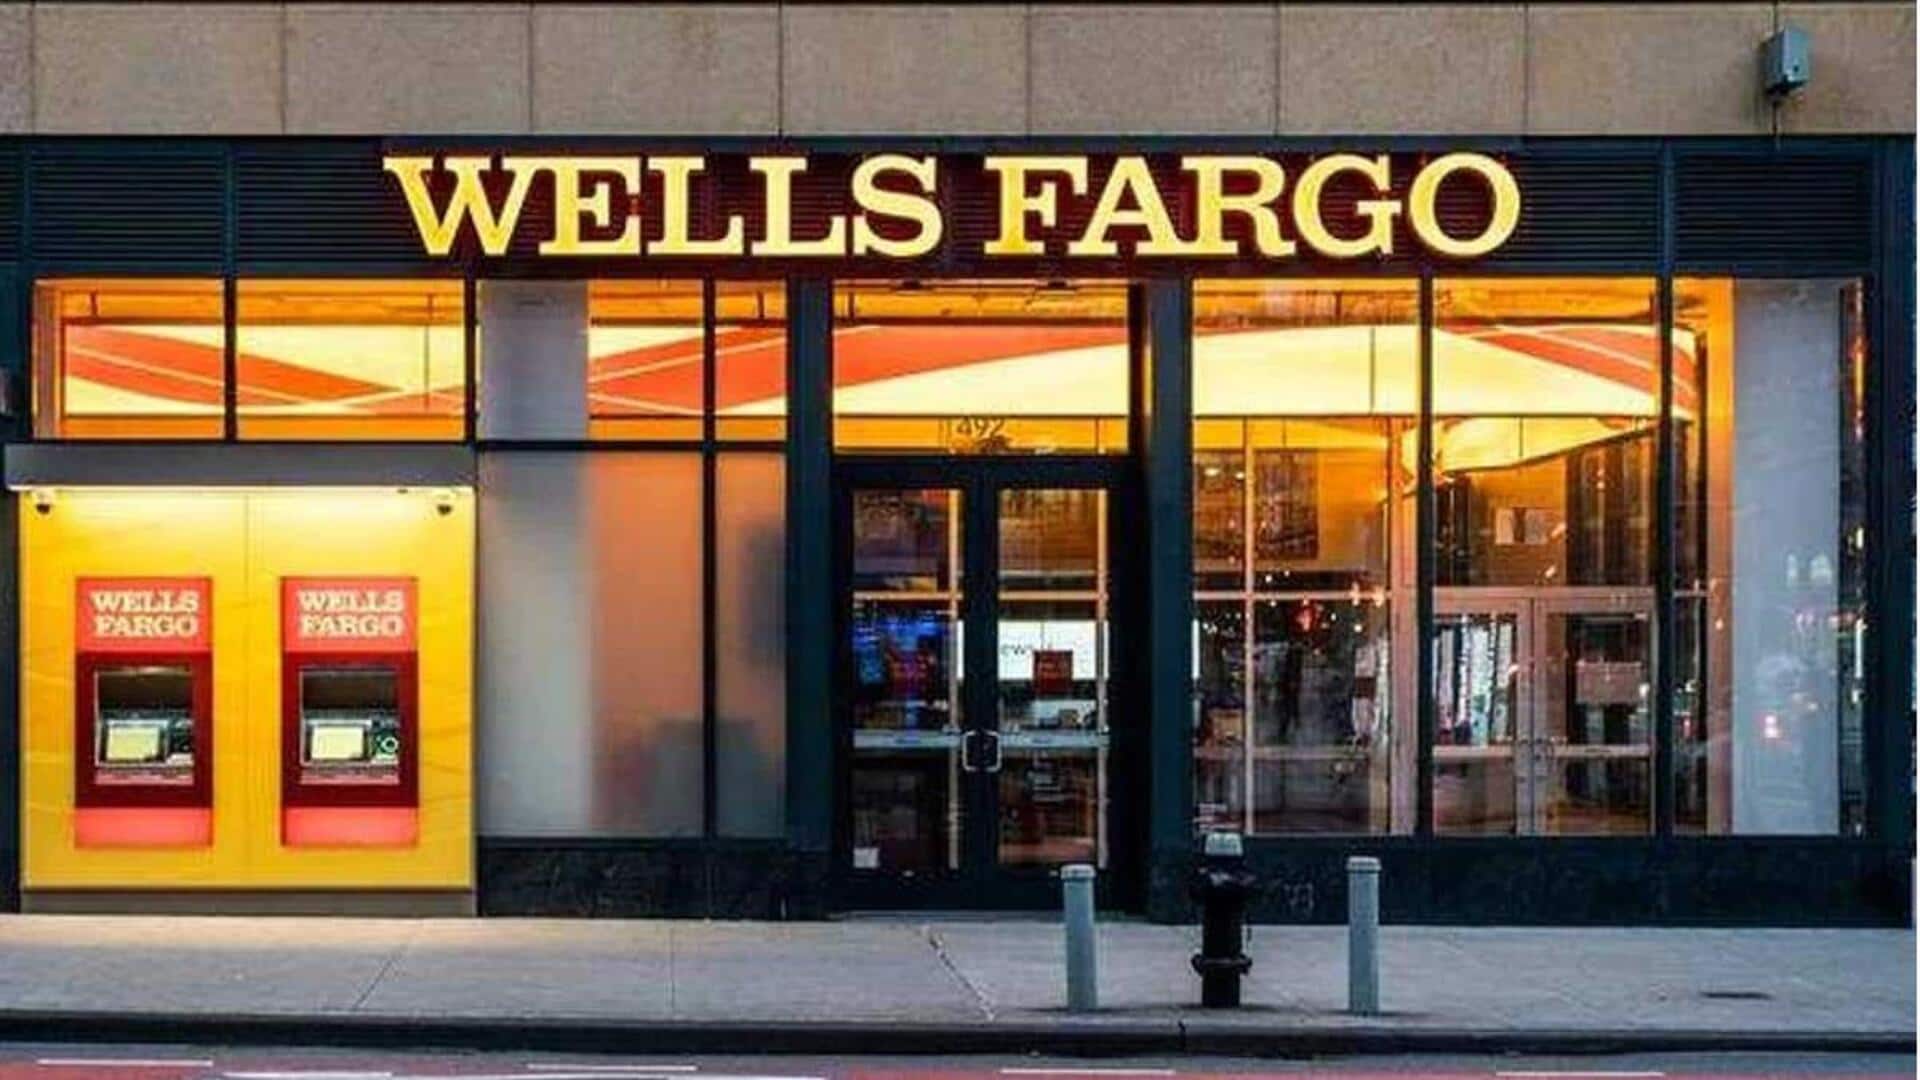 Wells Fargo fires several employees for faking work activity